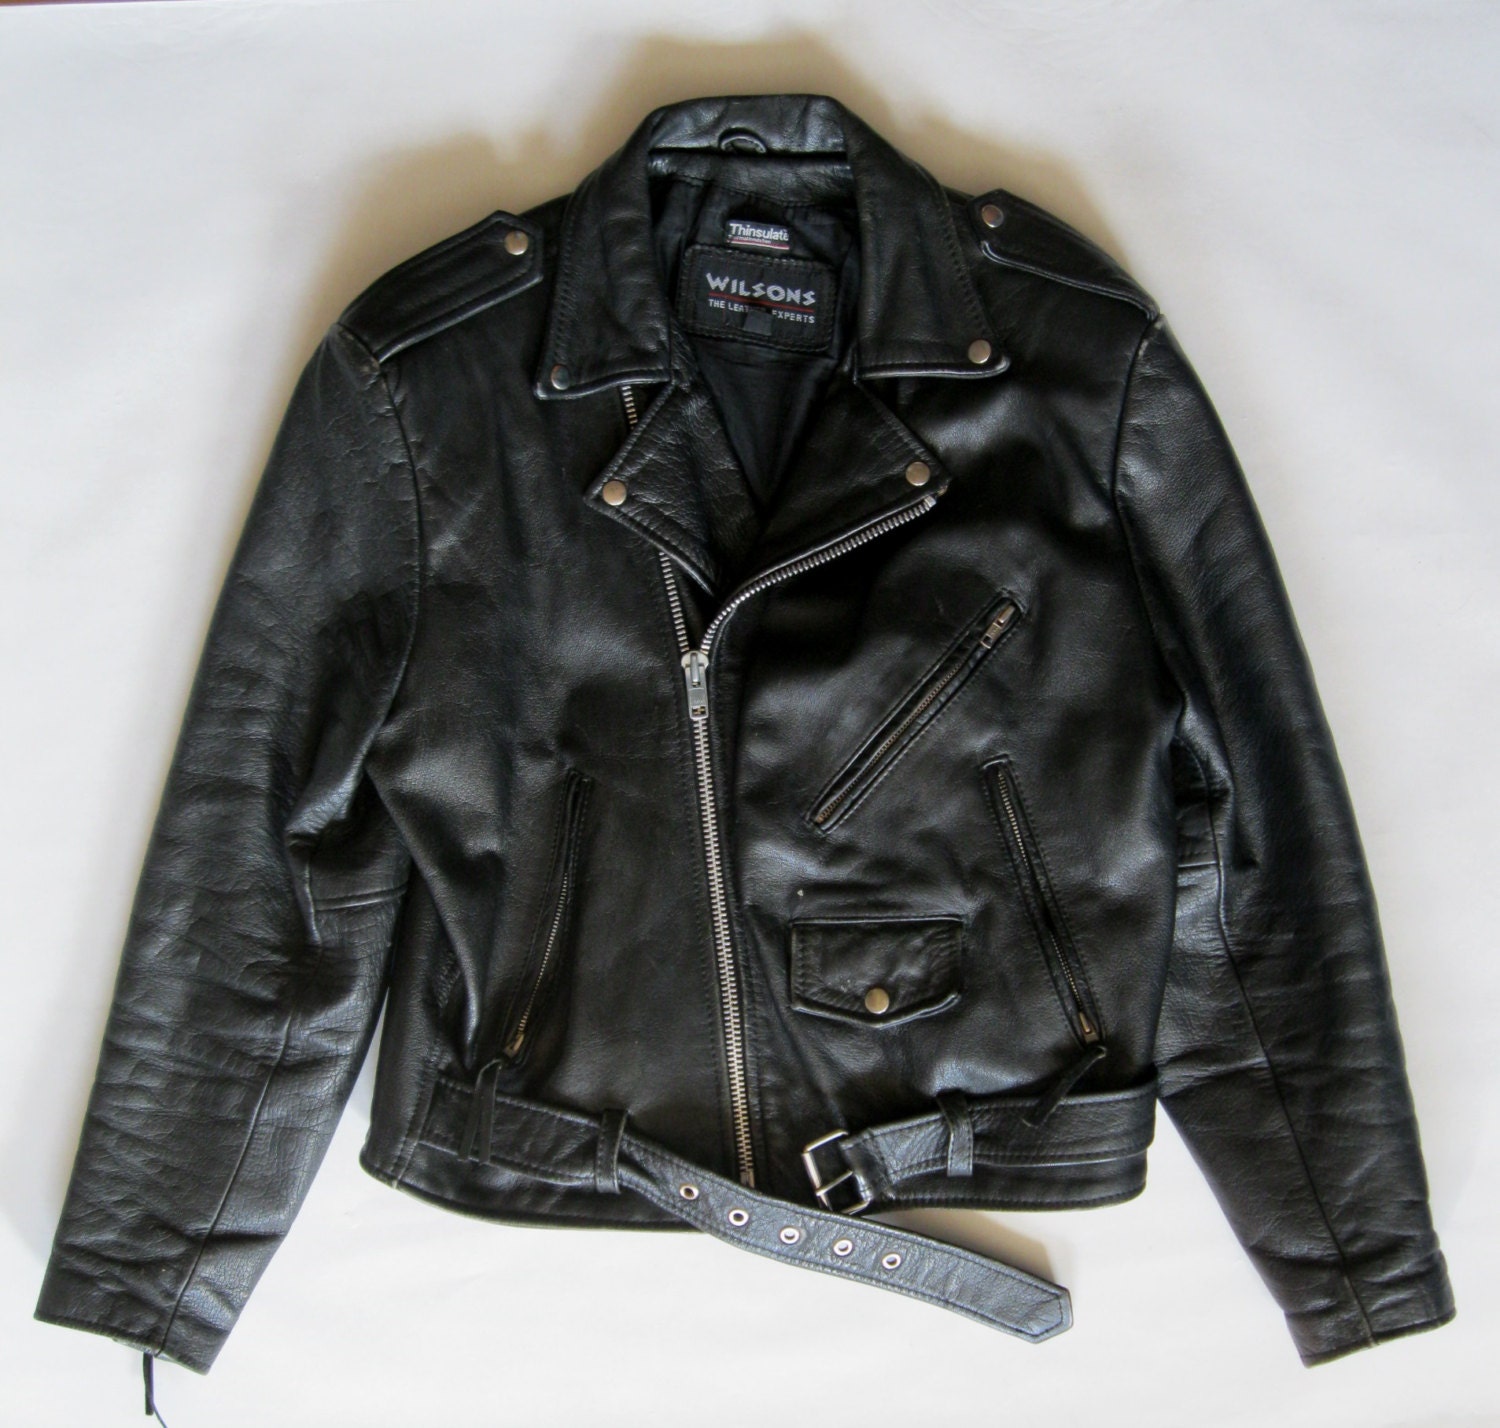 Black leather motorcycle jacket by Wilsons by afterglowvintage